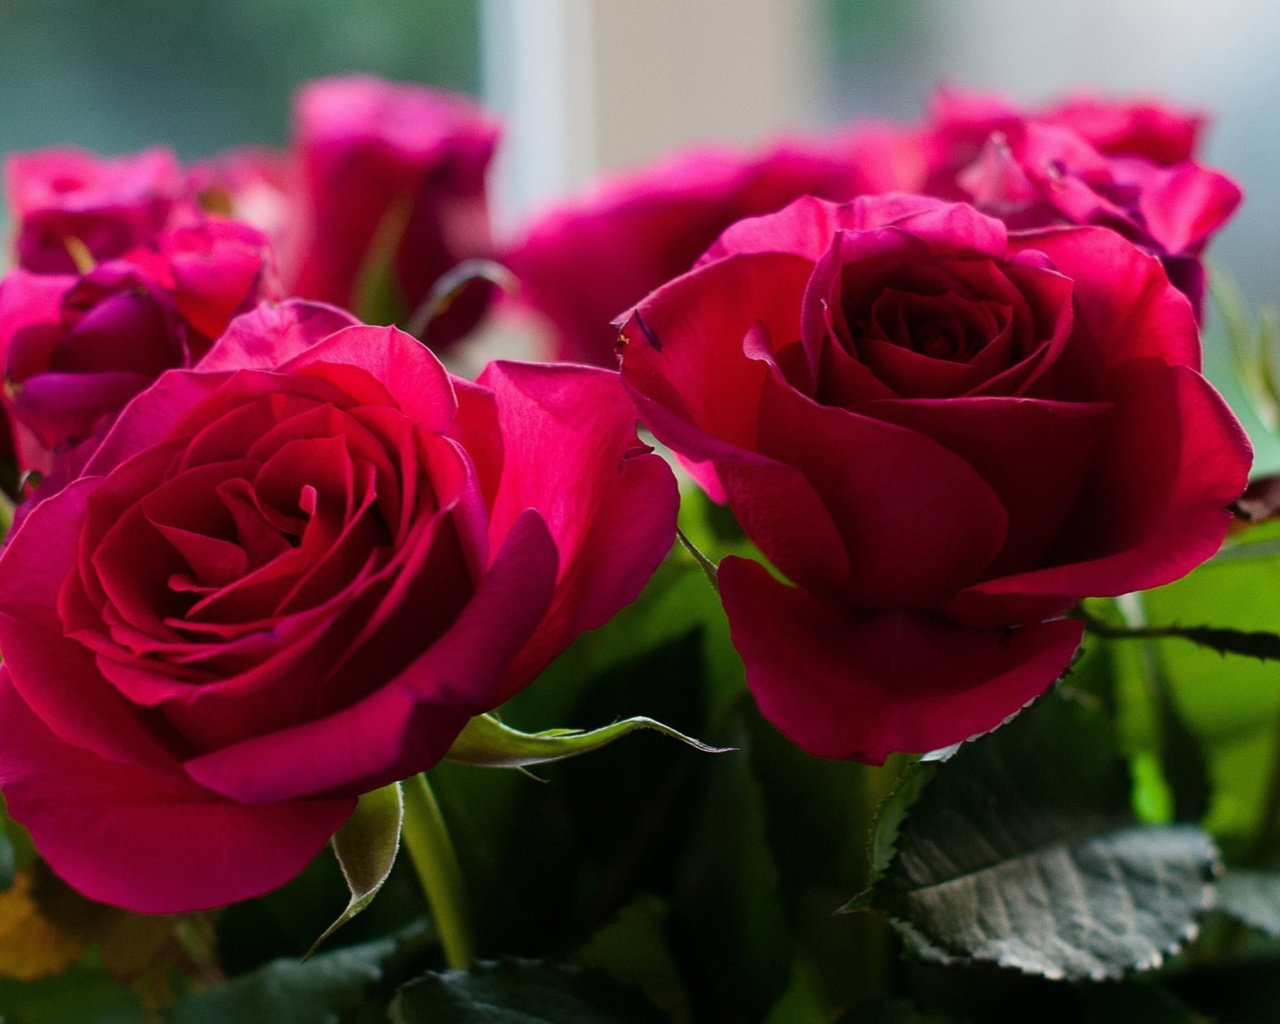 Picture of bouquet of roses from garden screenshot #1 1280x1024